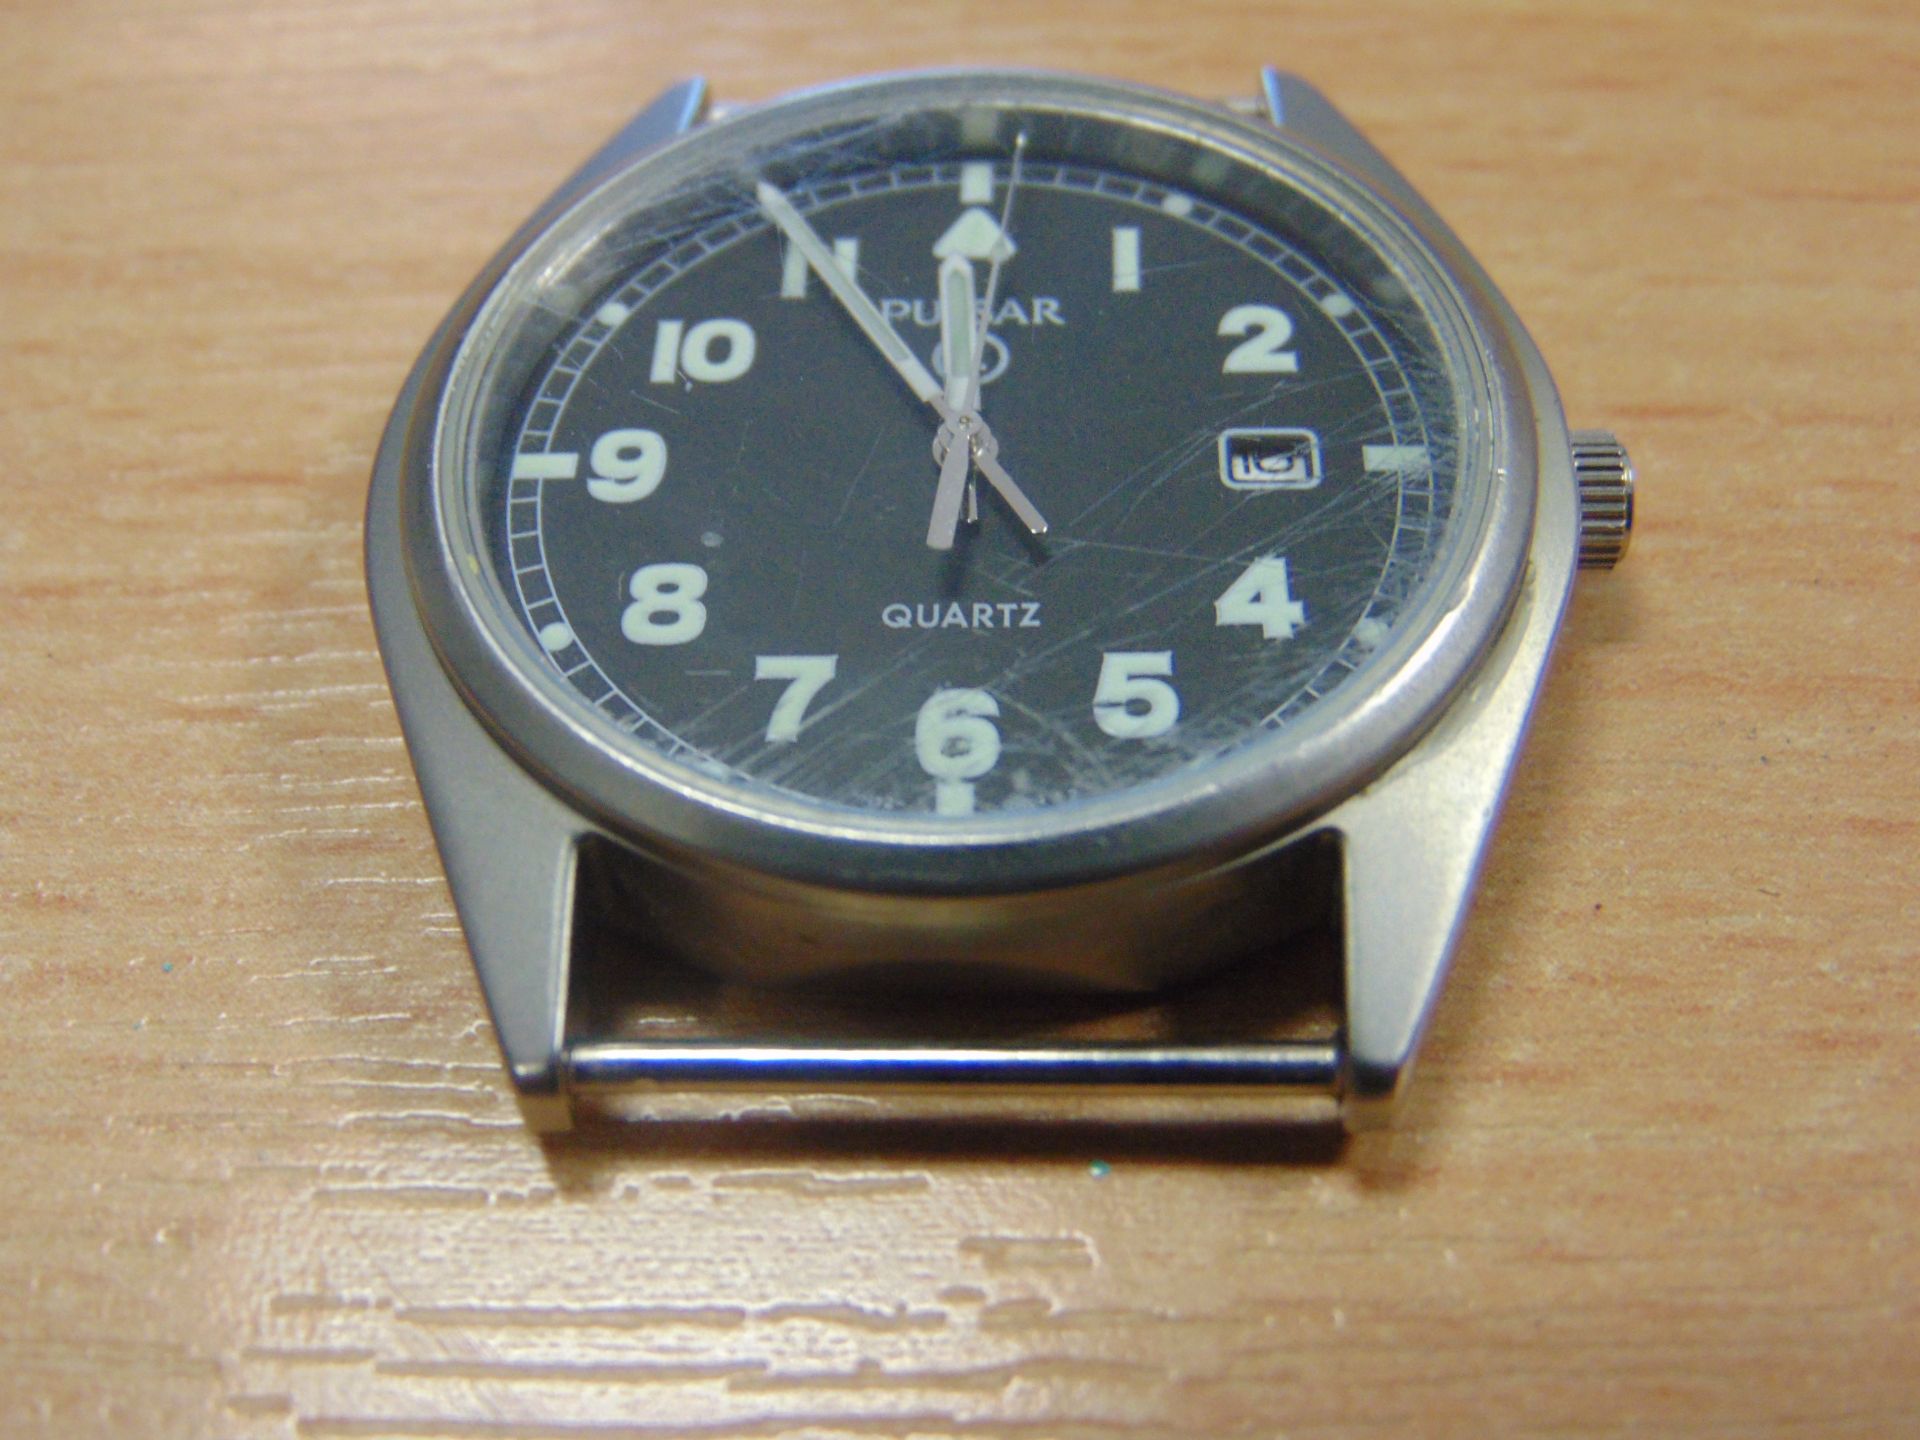 PULSAR W10 BRITISH ISSUE SERVICE WATCH NATO MARKINGS DATED 2004 - Image 7 of 12